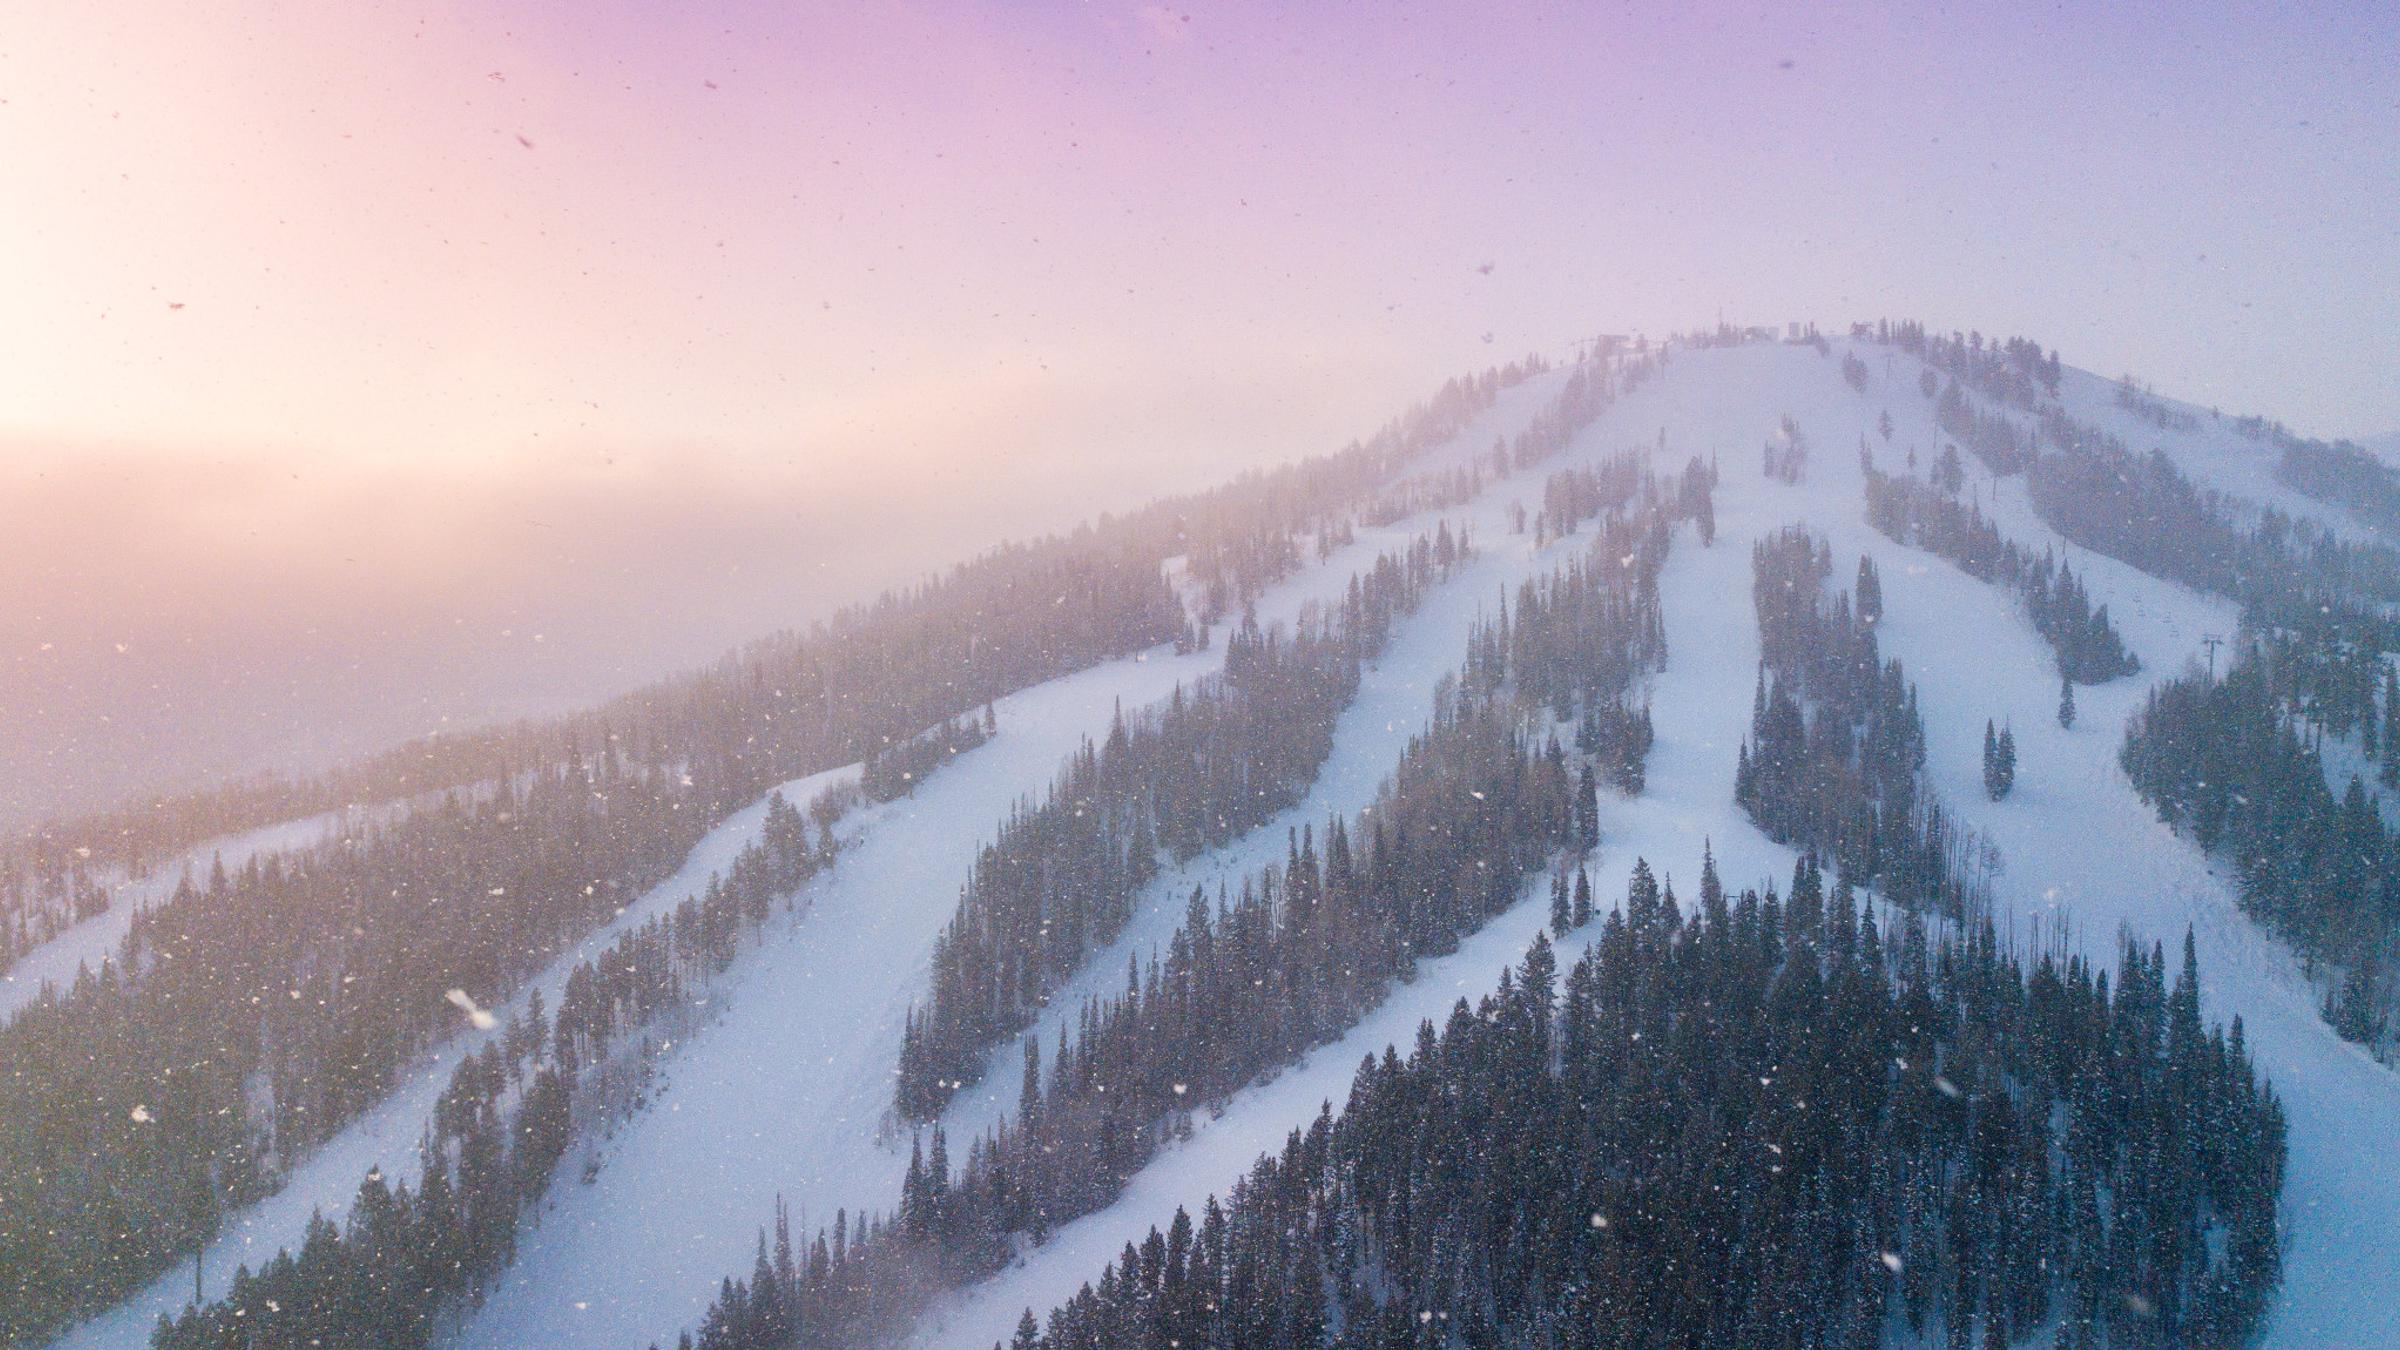 Bald mountain in the winter at sunrise